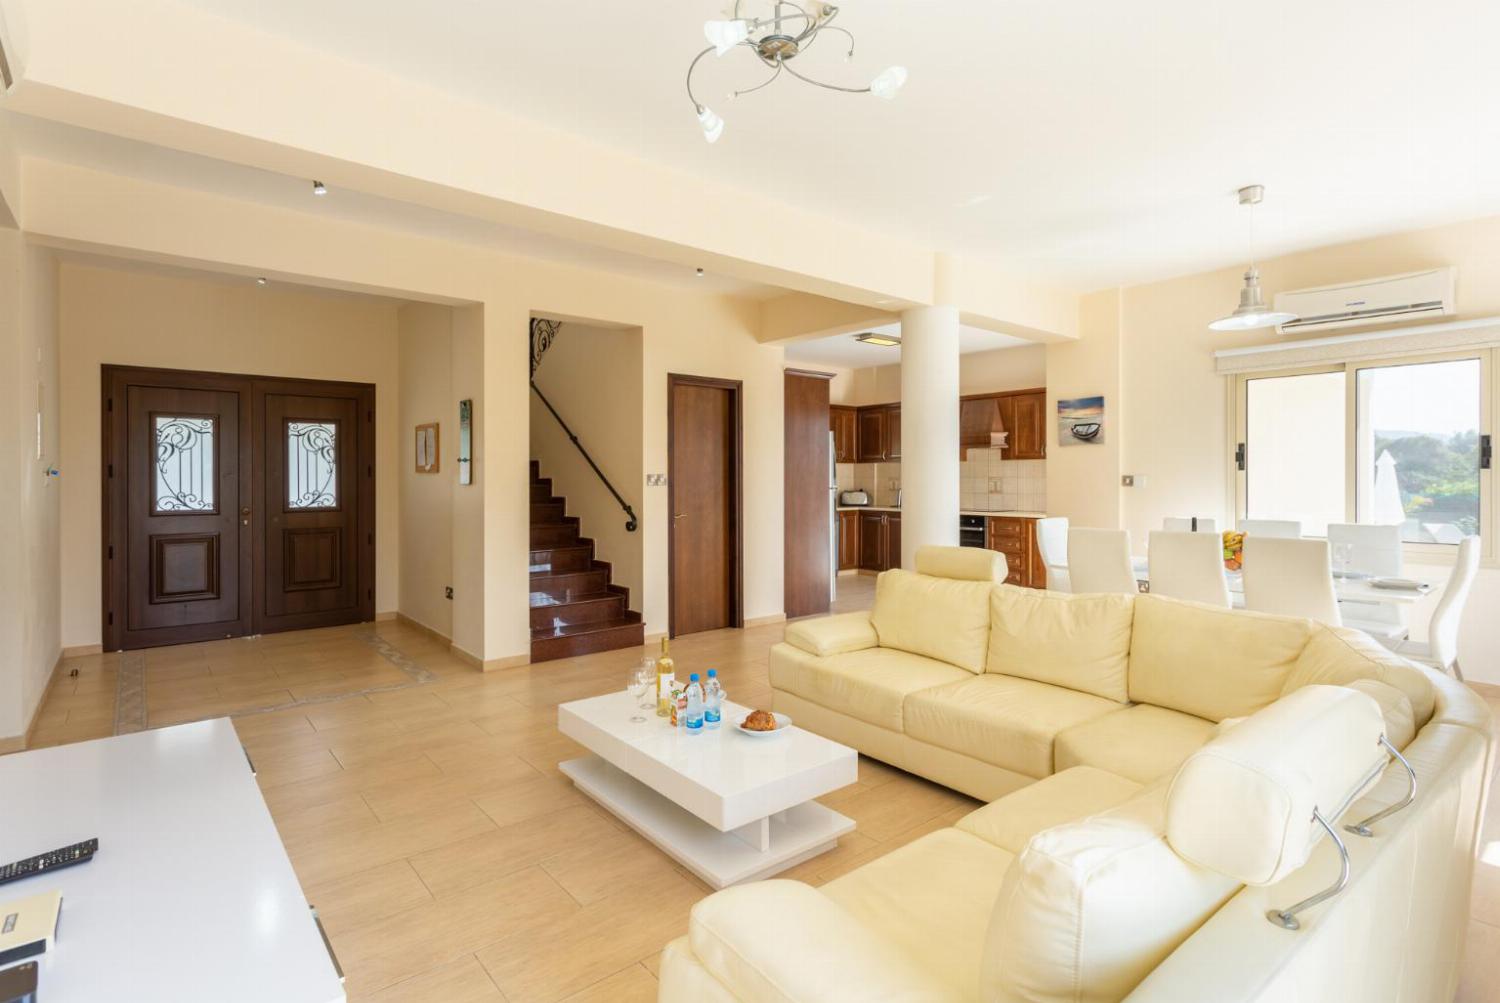 Open-plan living room with sofas, dining area, kitchen, ornamental fireplace, A/C, WiFi internet, and satellite TV